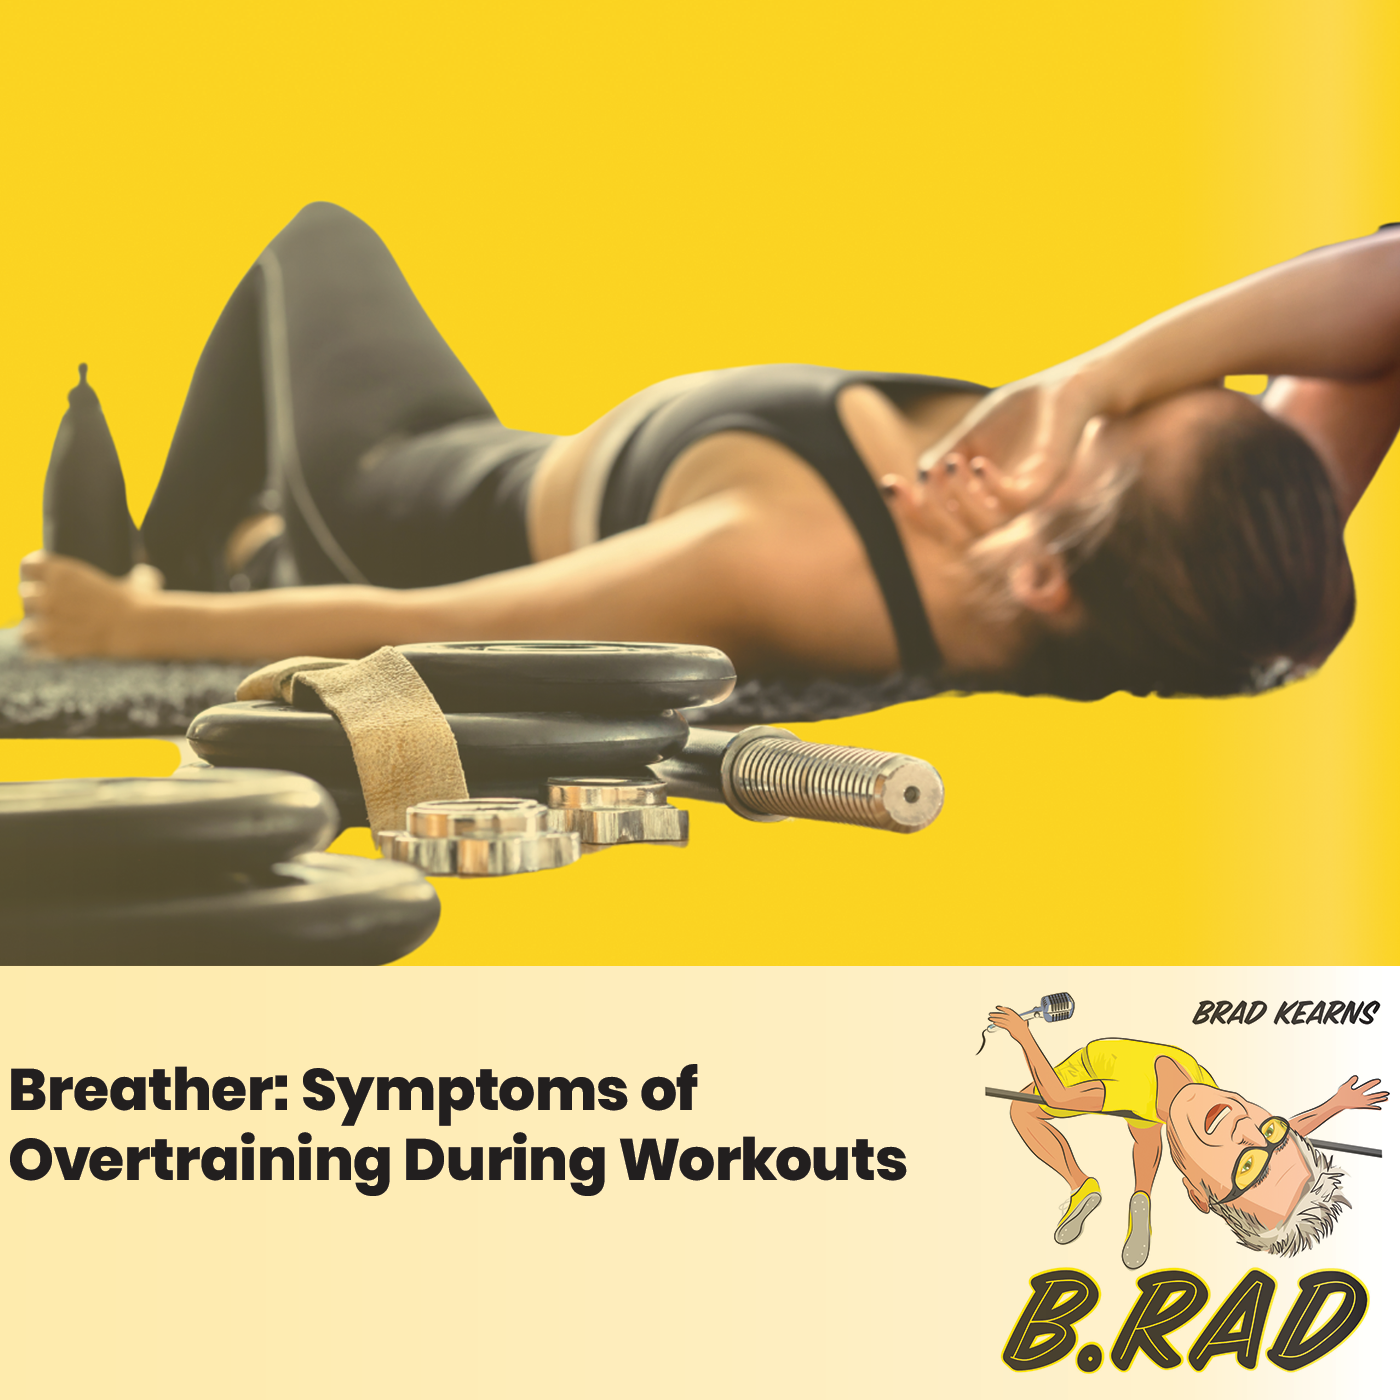 Breather: Symptoms of Overtraining During Workouts